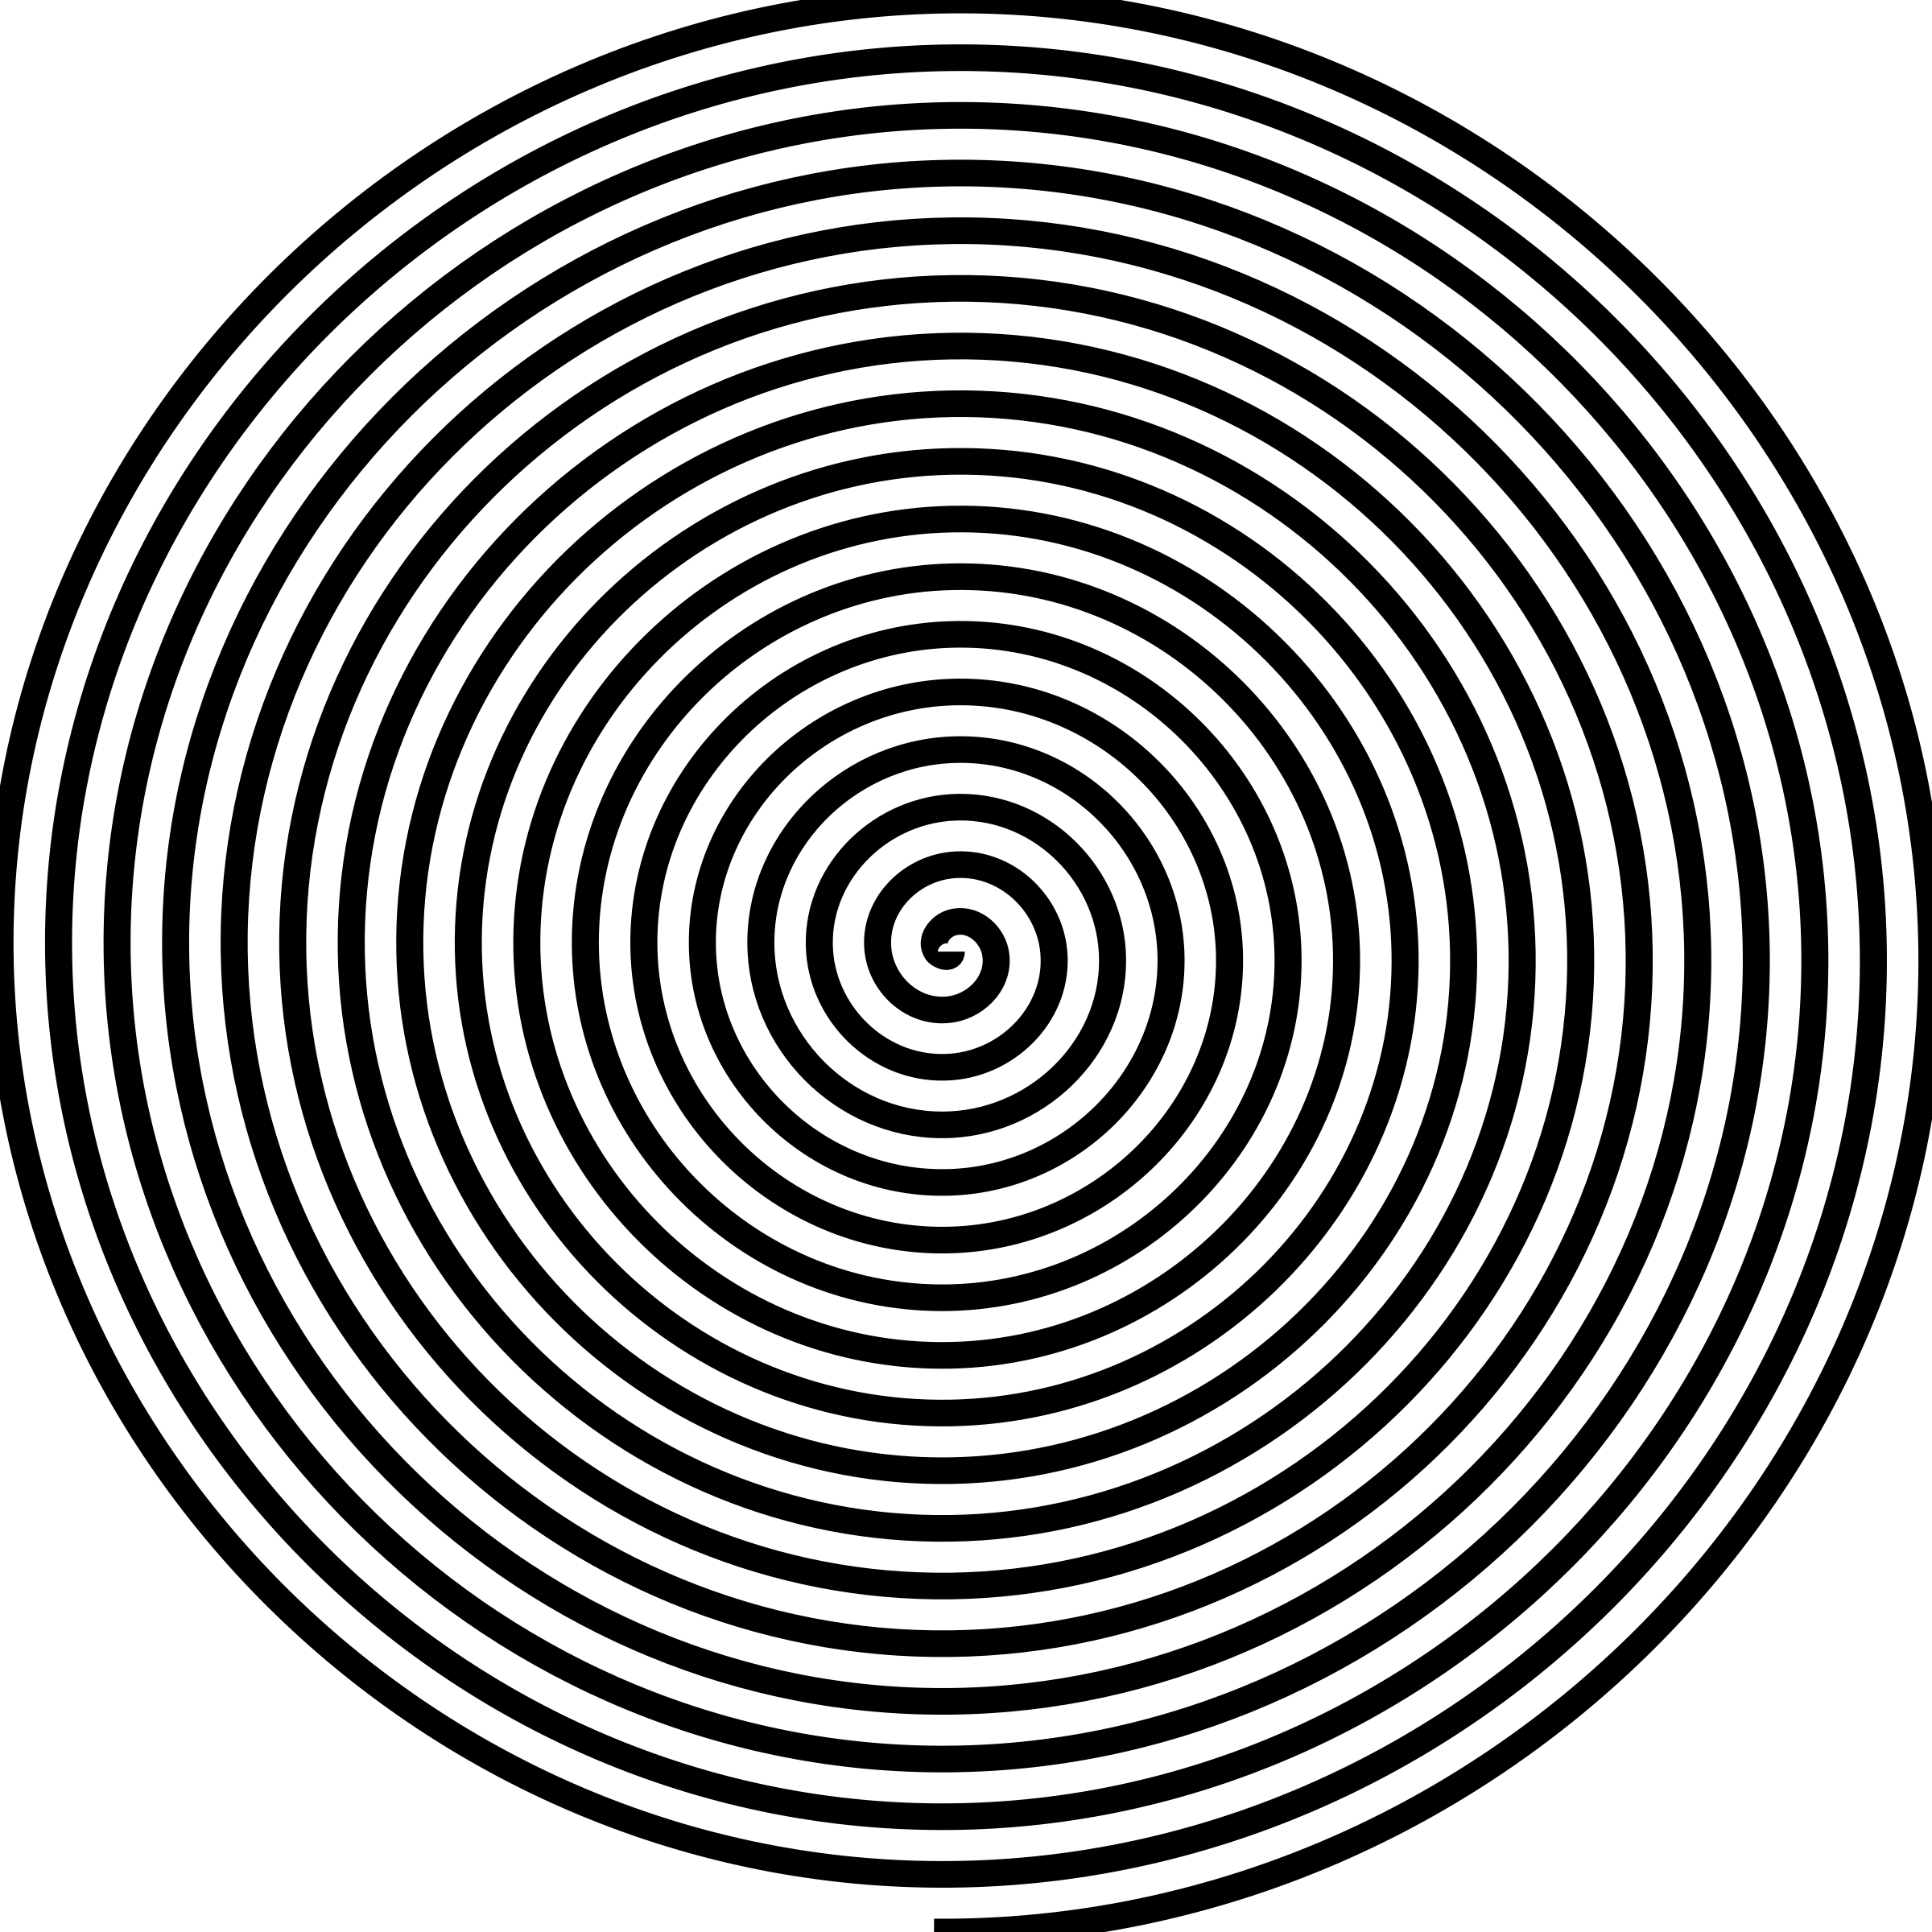 An Abstract Black And White Spiral Design - vrogue.co